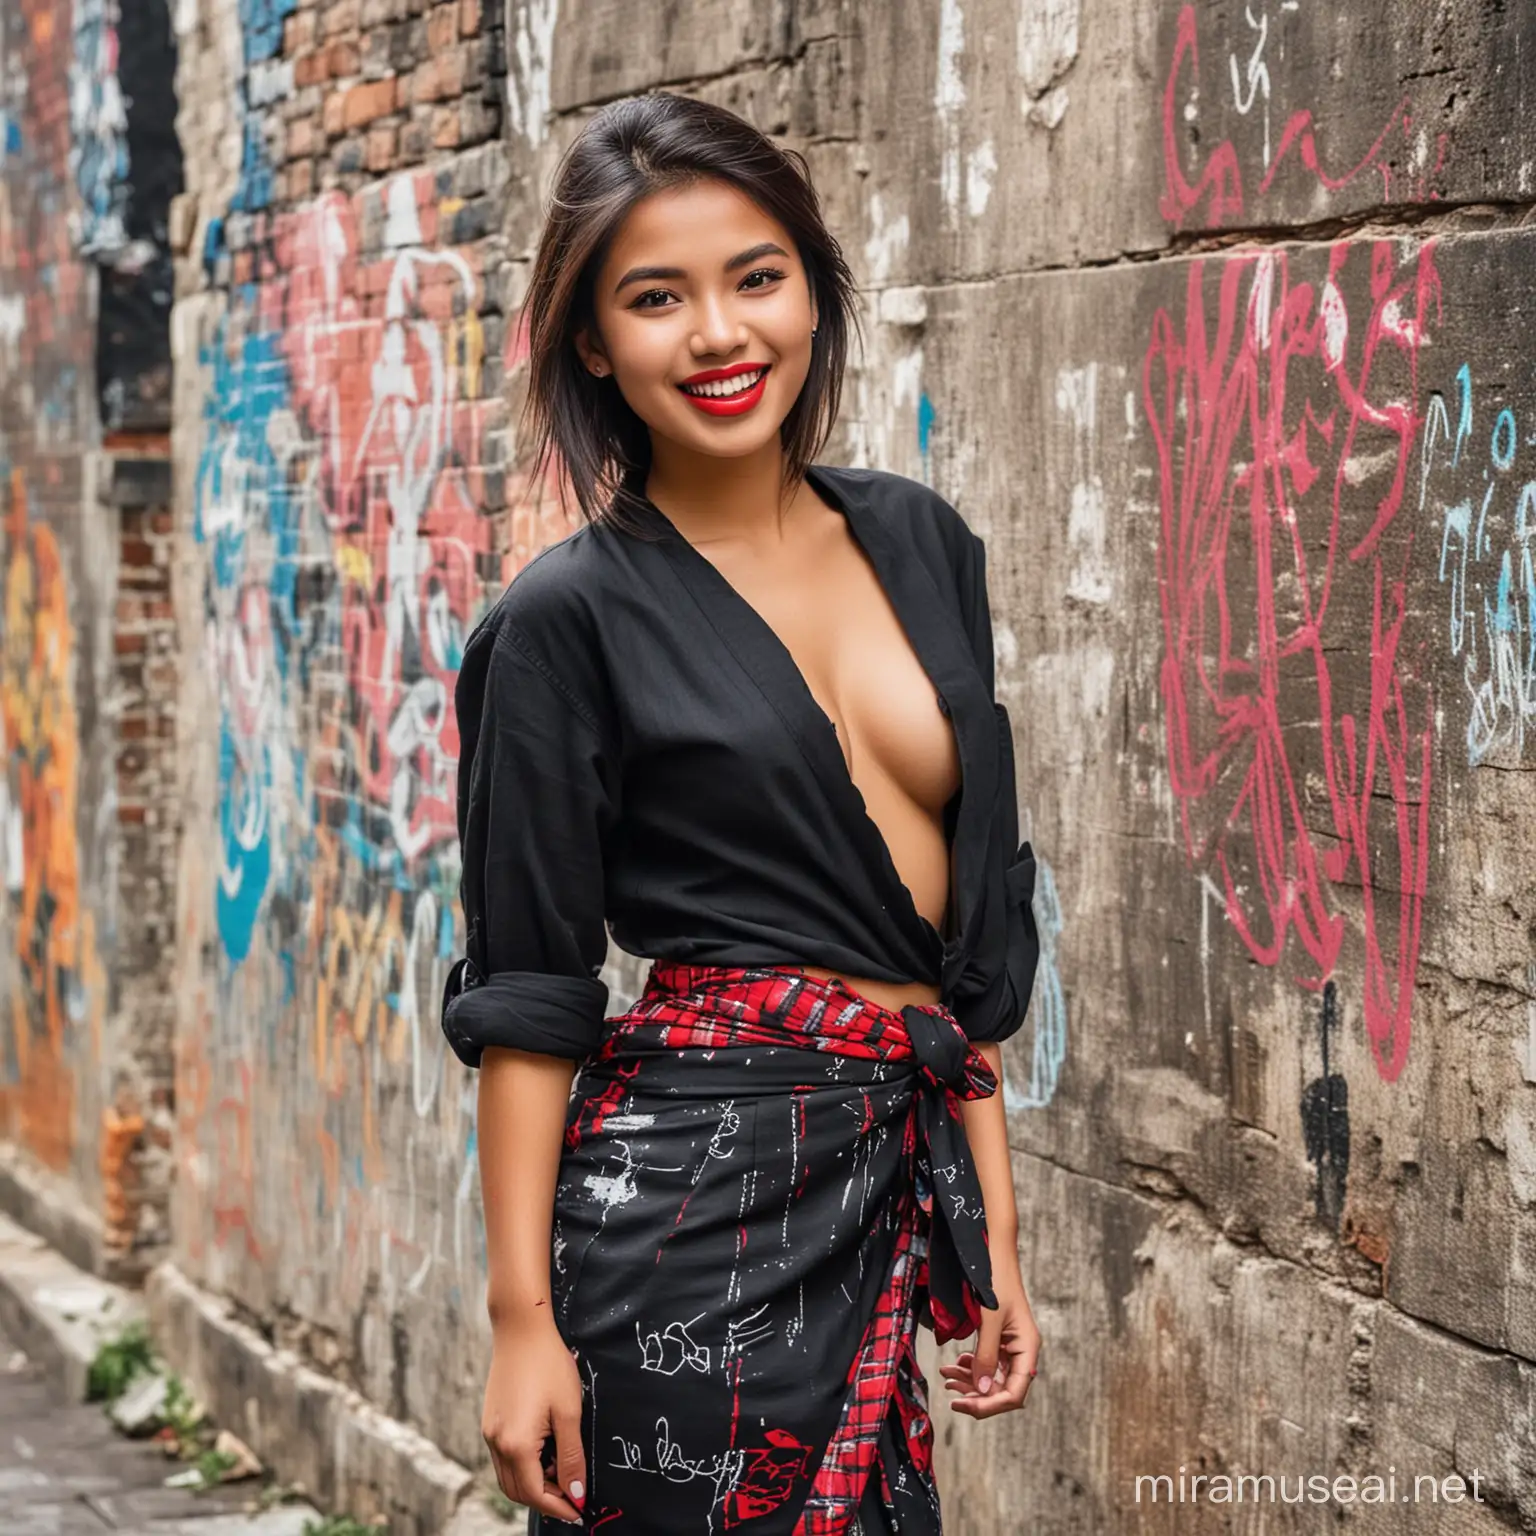 a very beautiful Indonesian teenager aged 20 years, lips wearing red lipstick, standing wearing a black linen shirt, and wearing a sarong, hair styled partially tied, posing smiling, the background is an old wall covered in colorful graffiti. .